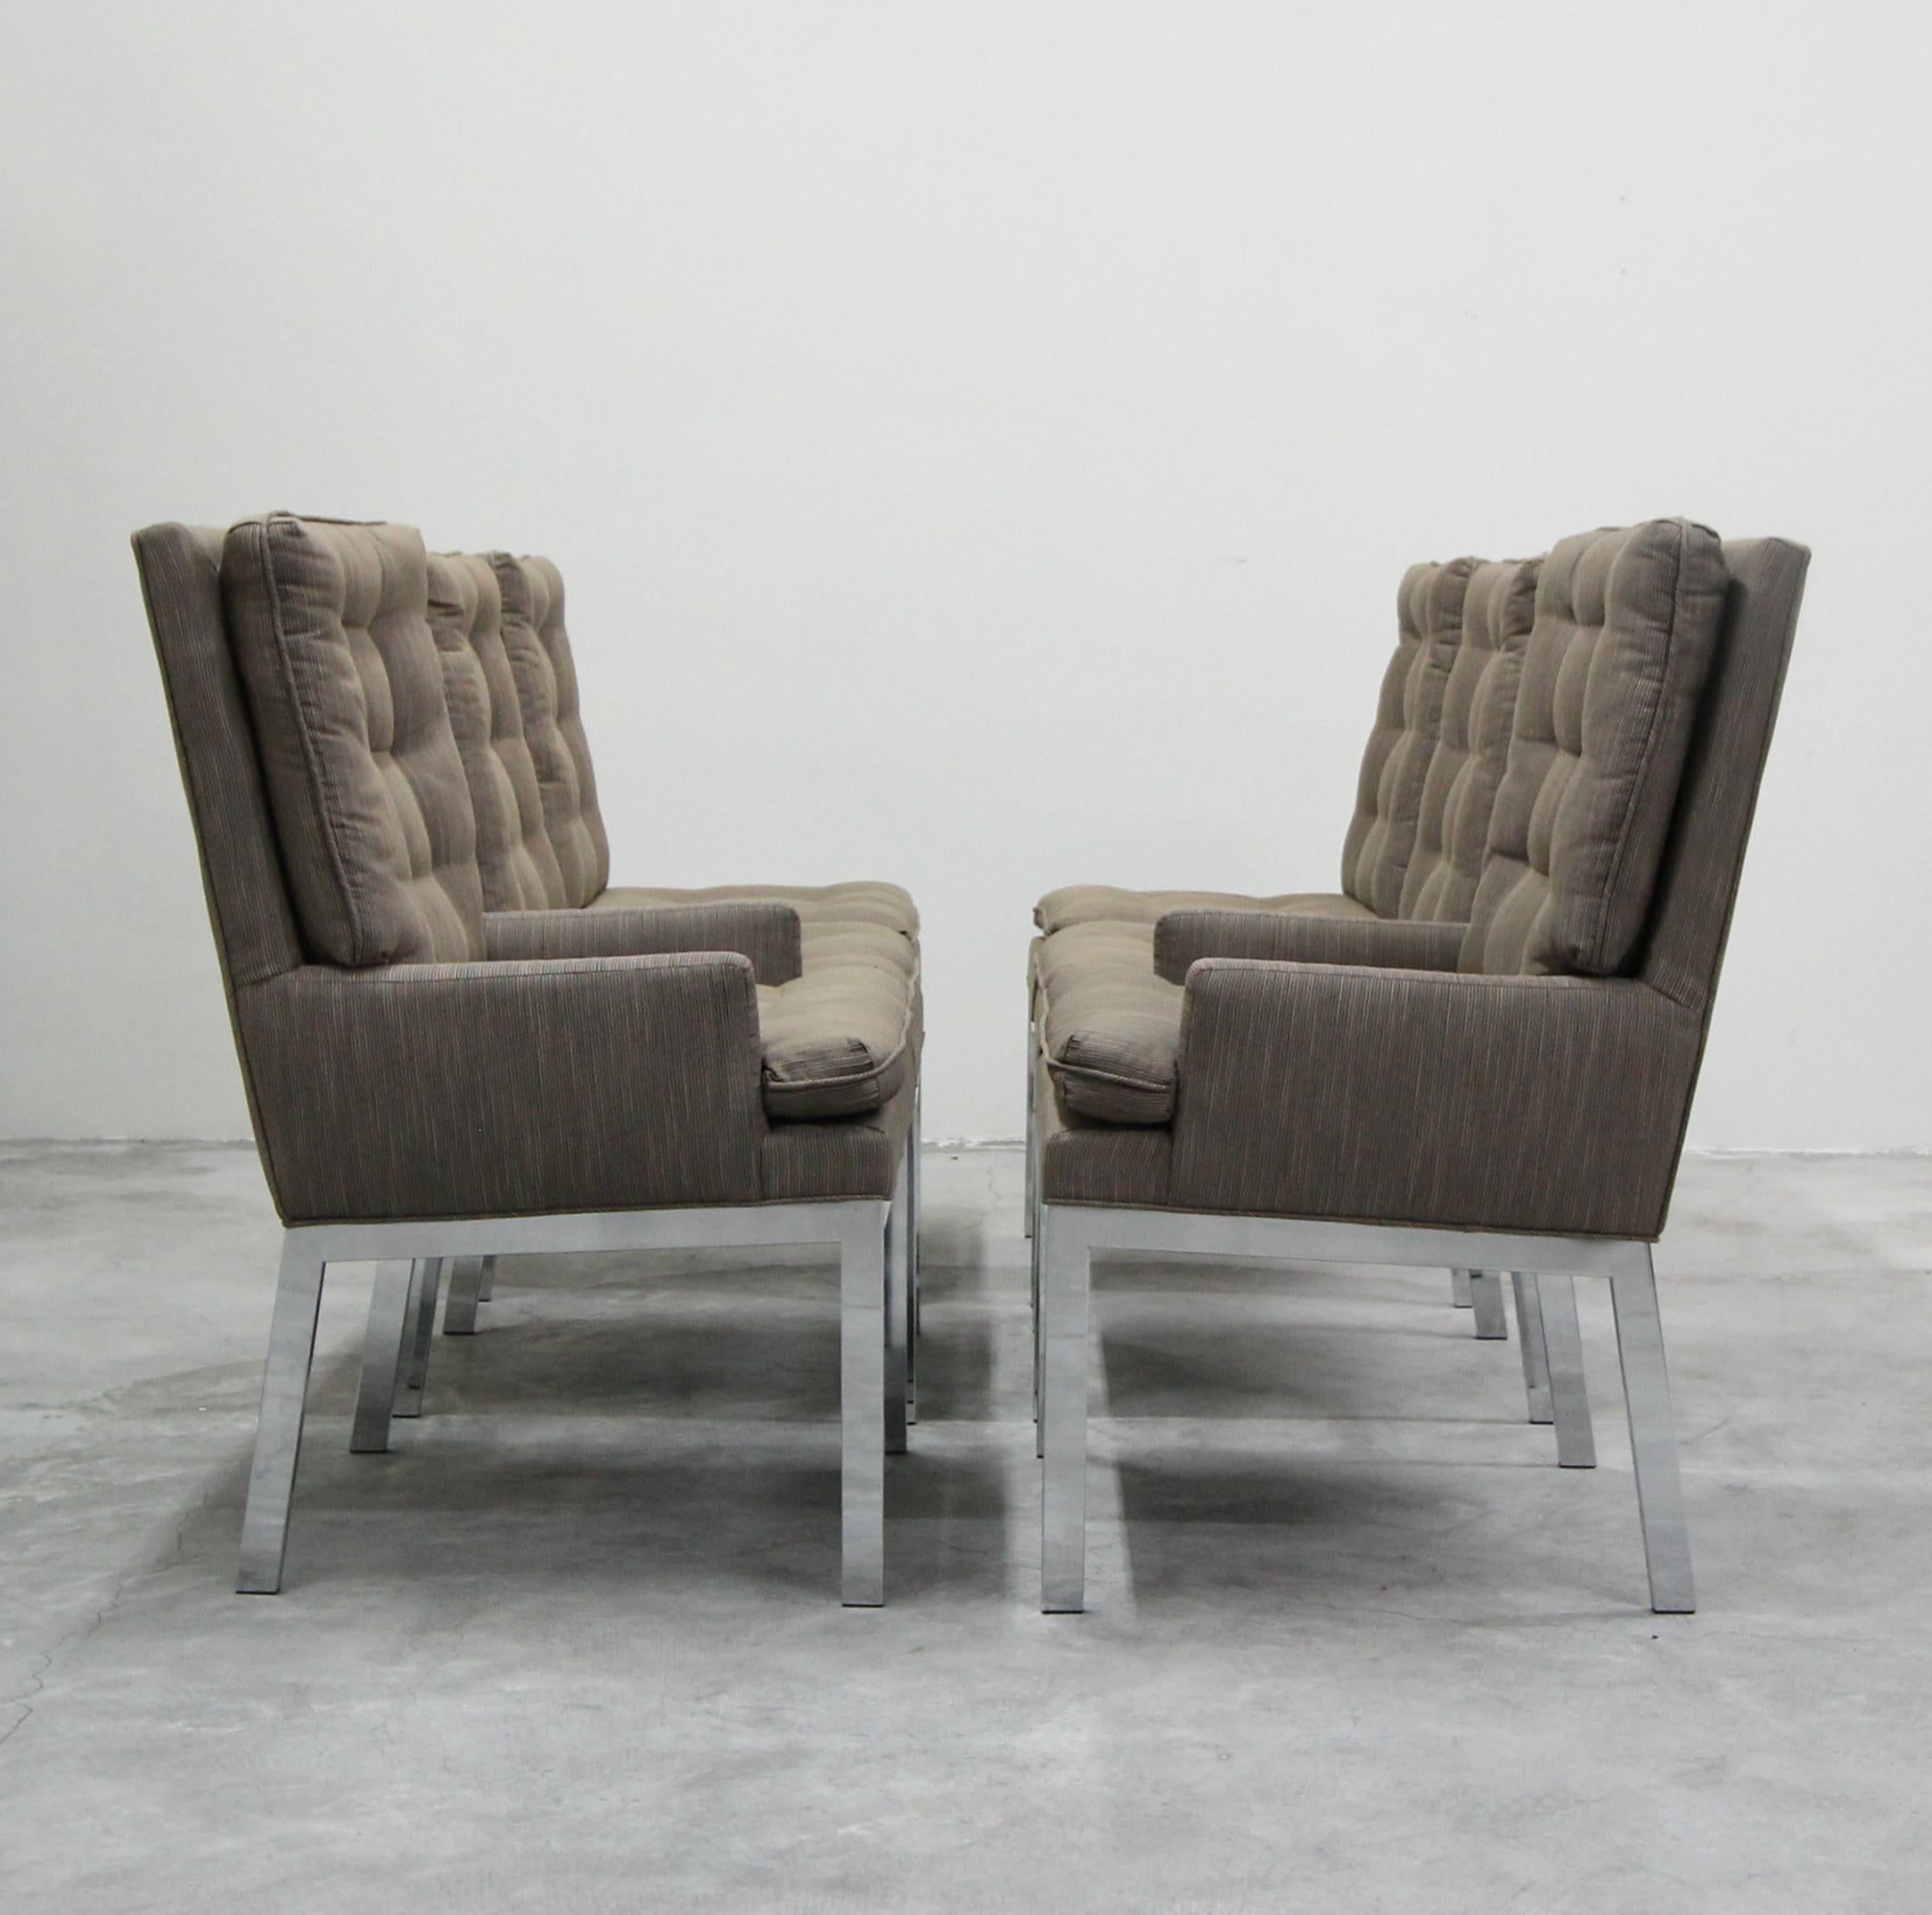 Exquisite set of chrome dining chairs designed by Milo Baughman for Design Institute America (DIA). Mirrored chrome, modern beauties. Nicely angled legs. Recently upholstered, upholstery is in good used condition overall.